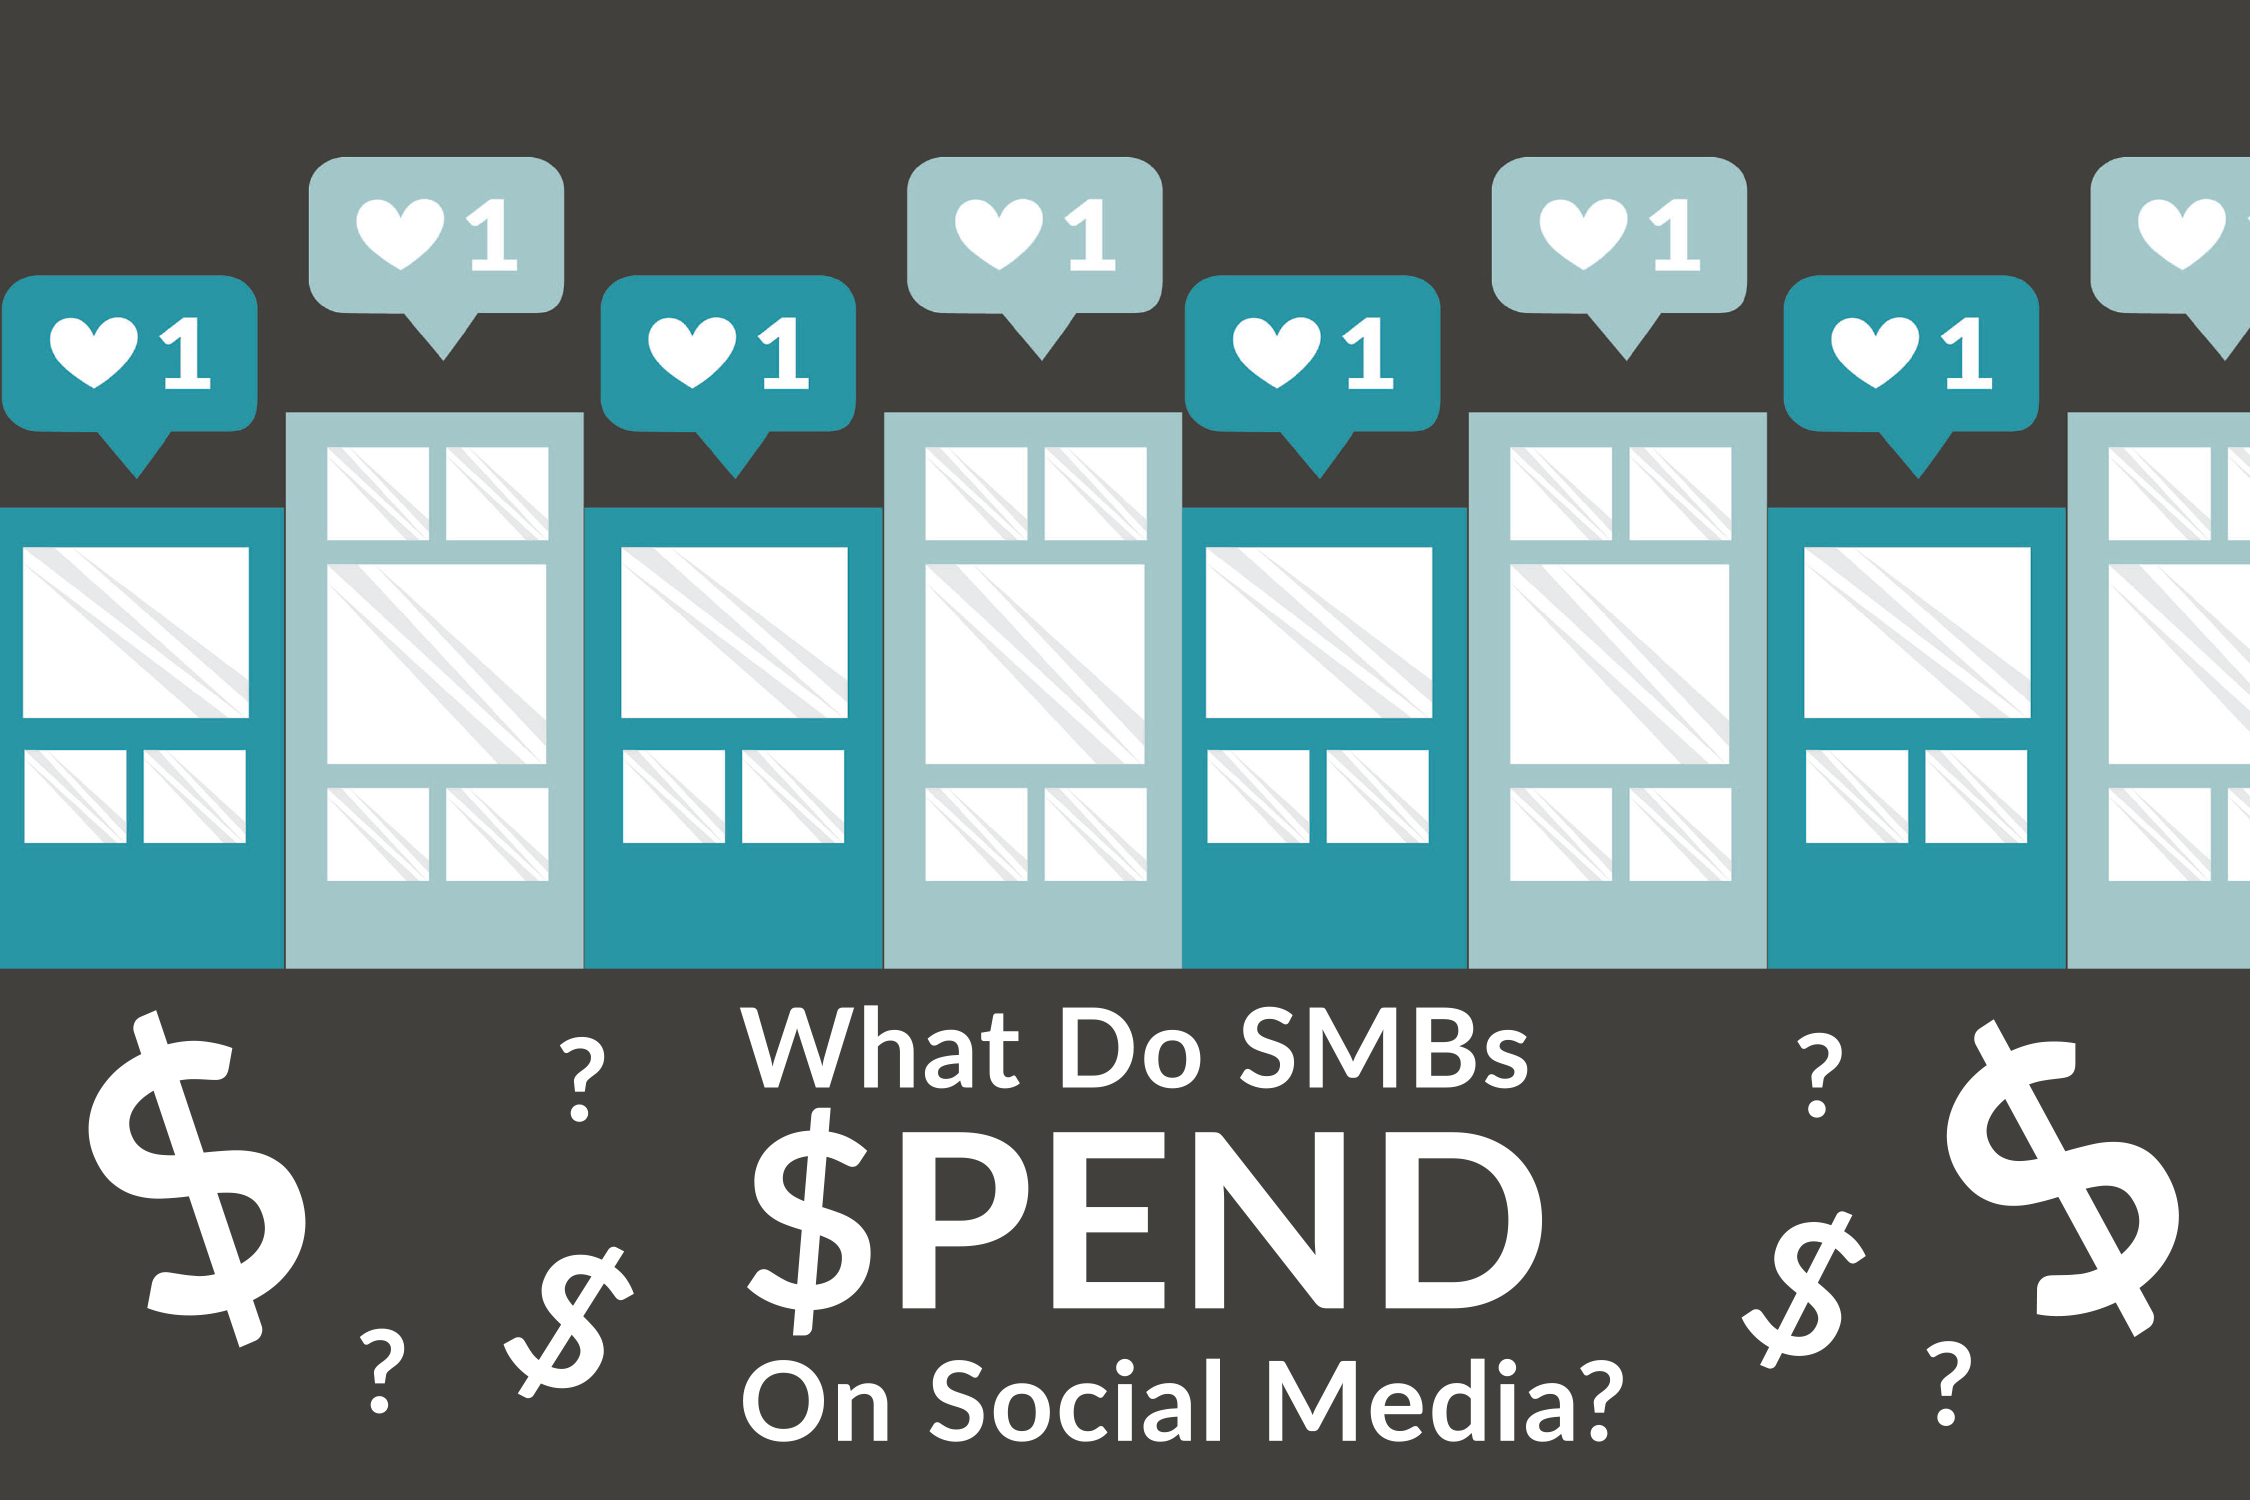 Investing In Social Media: A Small Business Perspective (infographic)